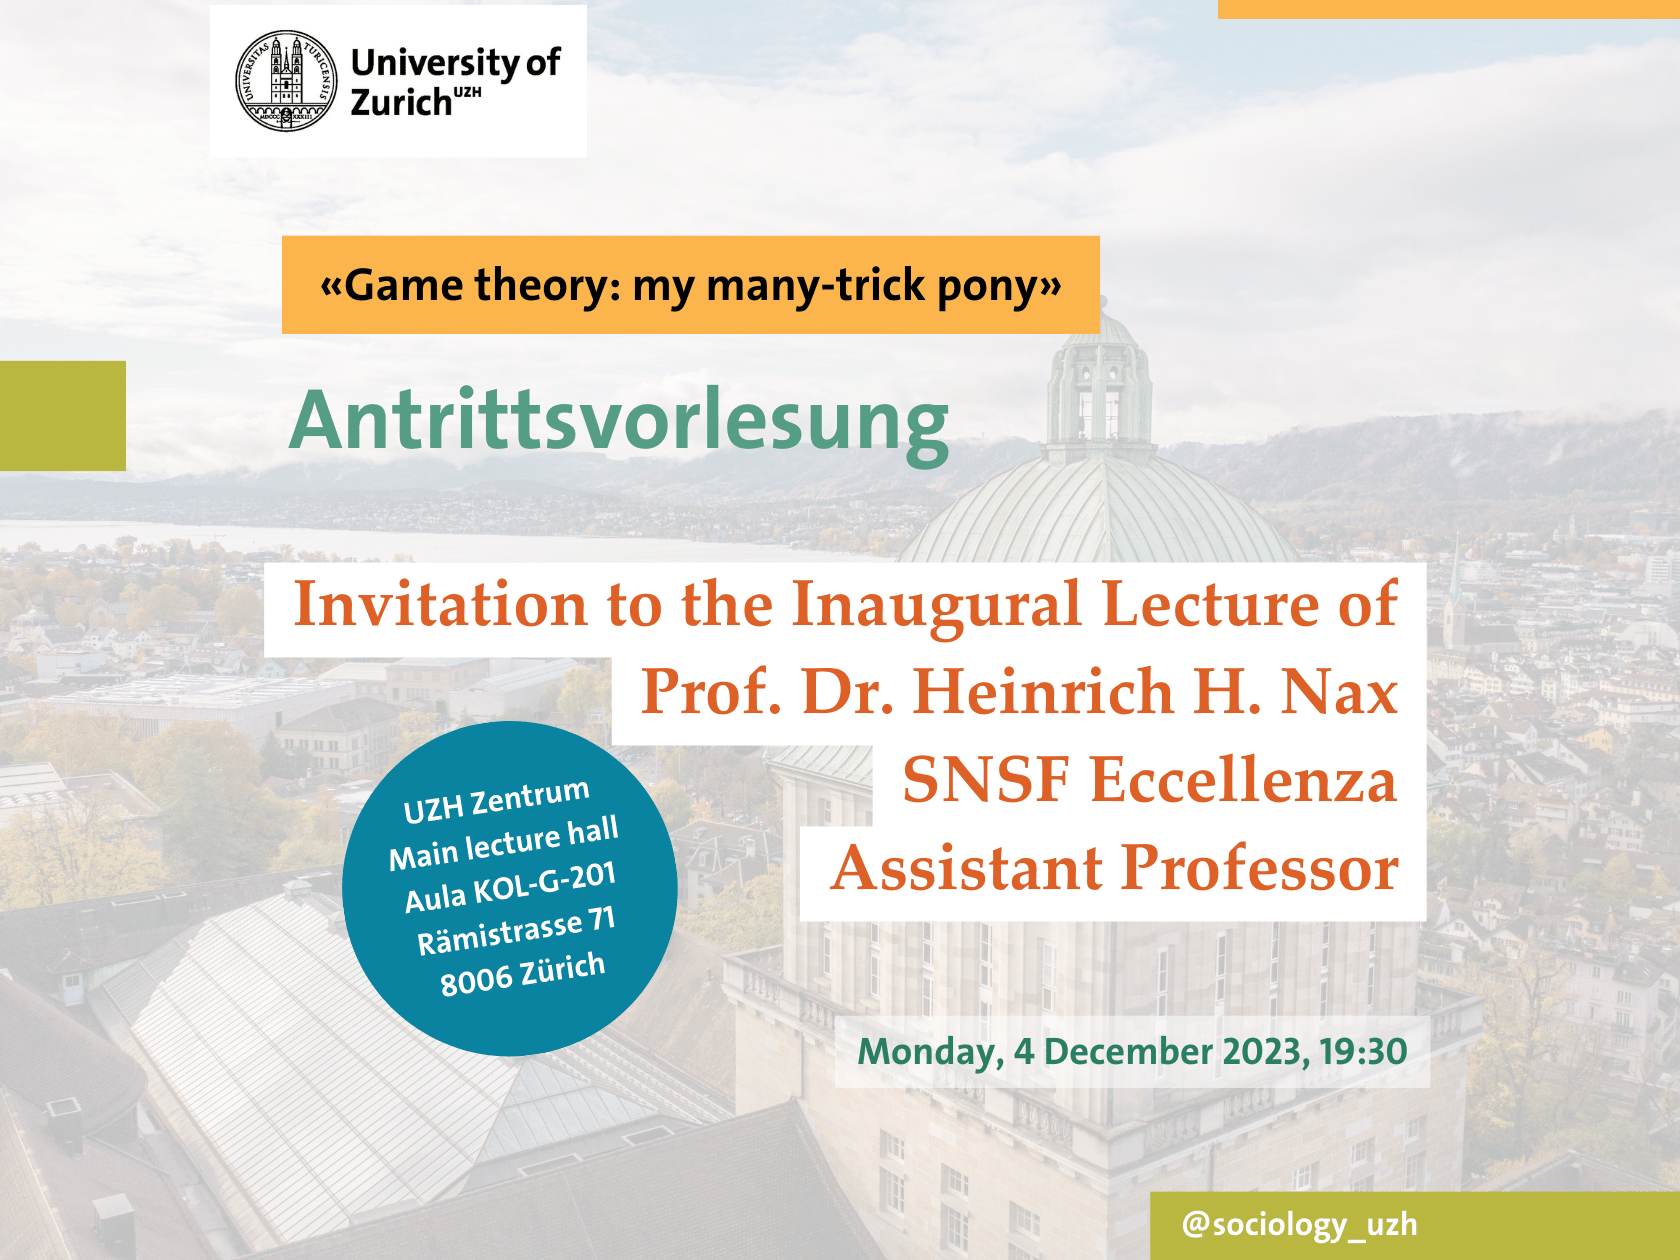 Eccellenza Professor Heinrich Nax is pleased to cordially invite you to his Inaugural Lecture on Monday, December 4, 2023 at 19:30.